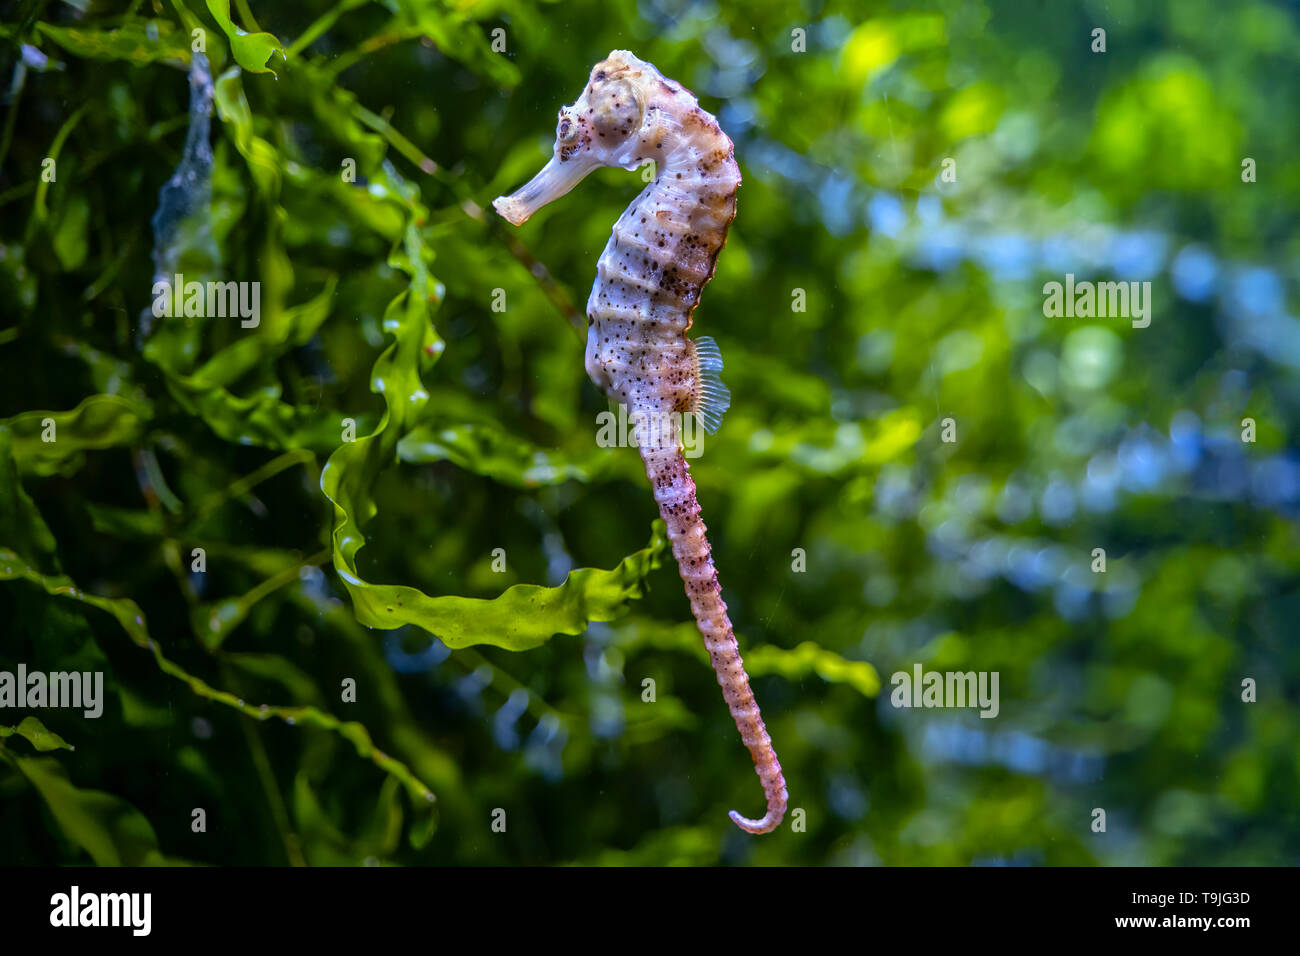 Longsnout seahorse (Hippocampus reidi) or Slender sea horse, small marine fish in the family: Syngnathidae. Stock Photo